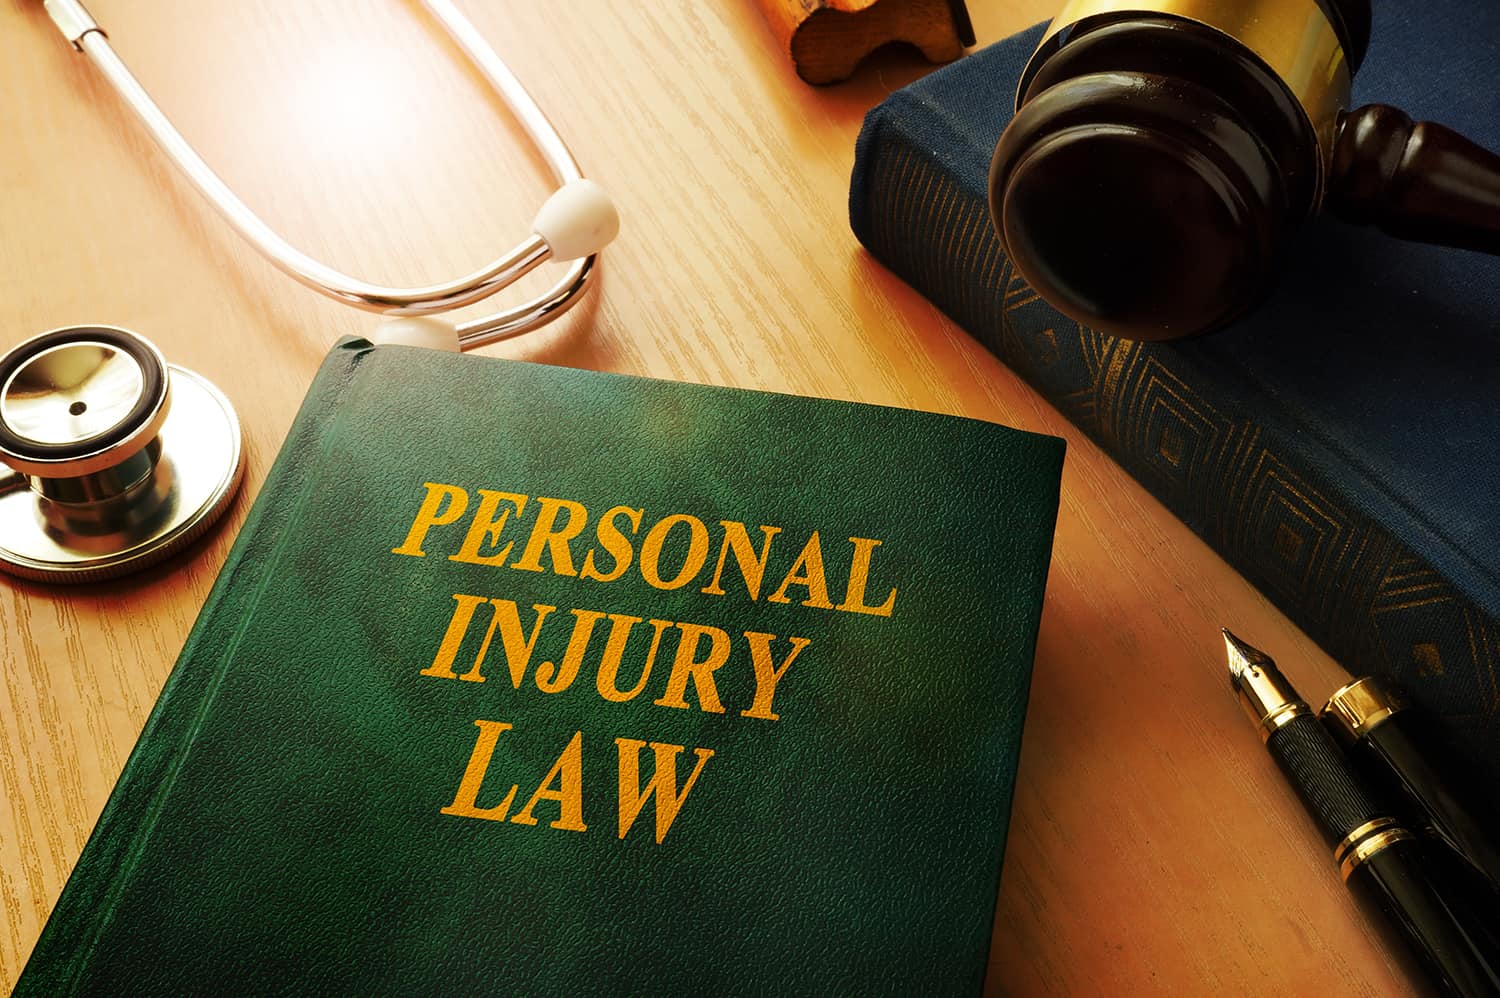 Beware of Common Personal Injuries That Strike Unexpectedly